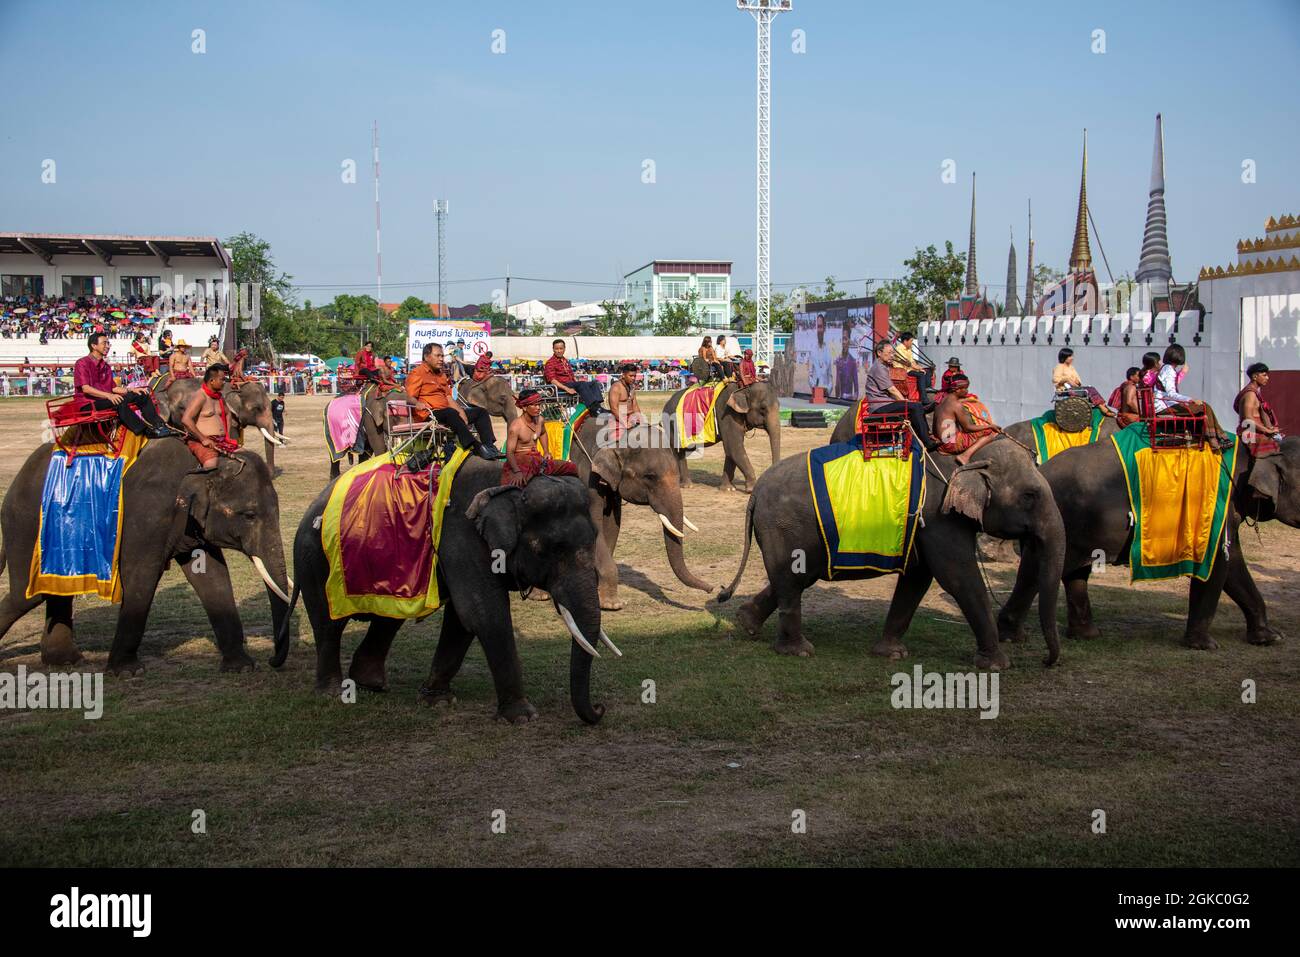 Surin, Thailand Nov 18, 2018 : Parade on Elephant's Back Festival is when elephants parade during The Annual Elephant Roundup on November 18, 2018 in Stock Photo